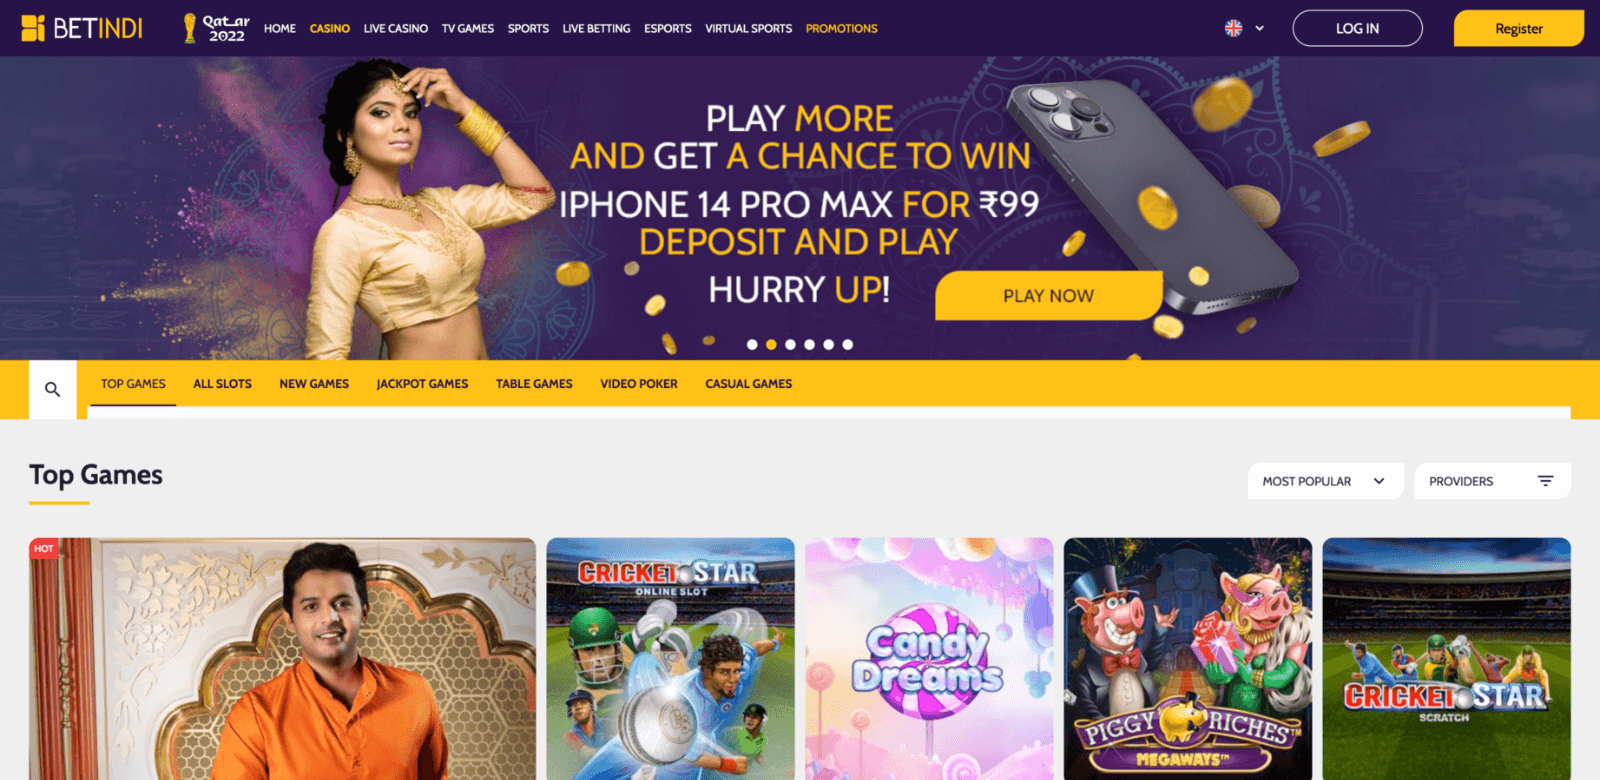 On the Betindi platform, players from India have access to a section of online casinos with hundreds of entertainment